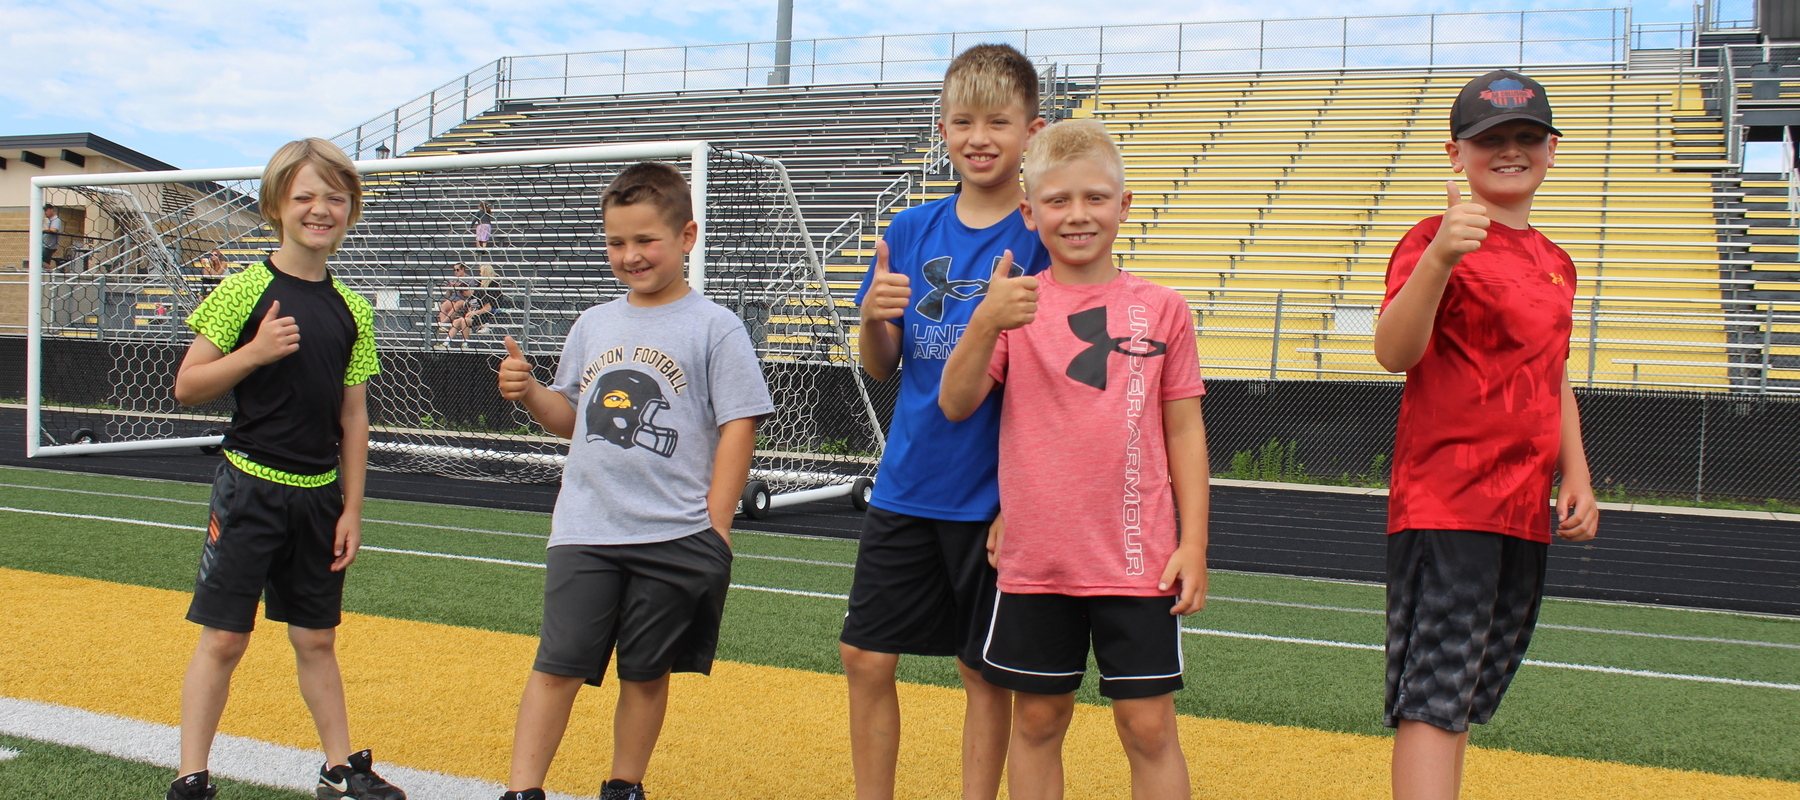 Young players smile at the Hamilton football program's 'Kids Day' camp